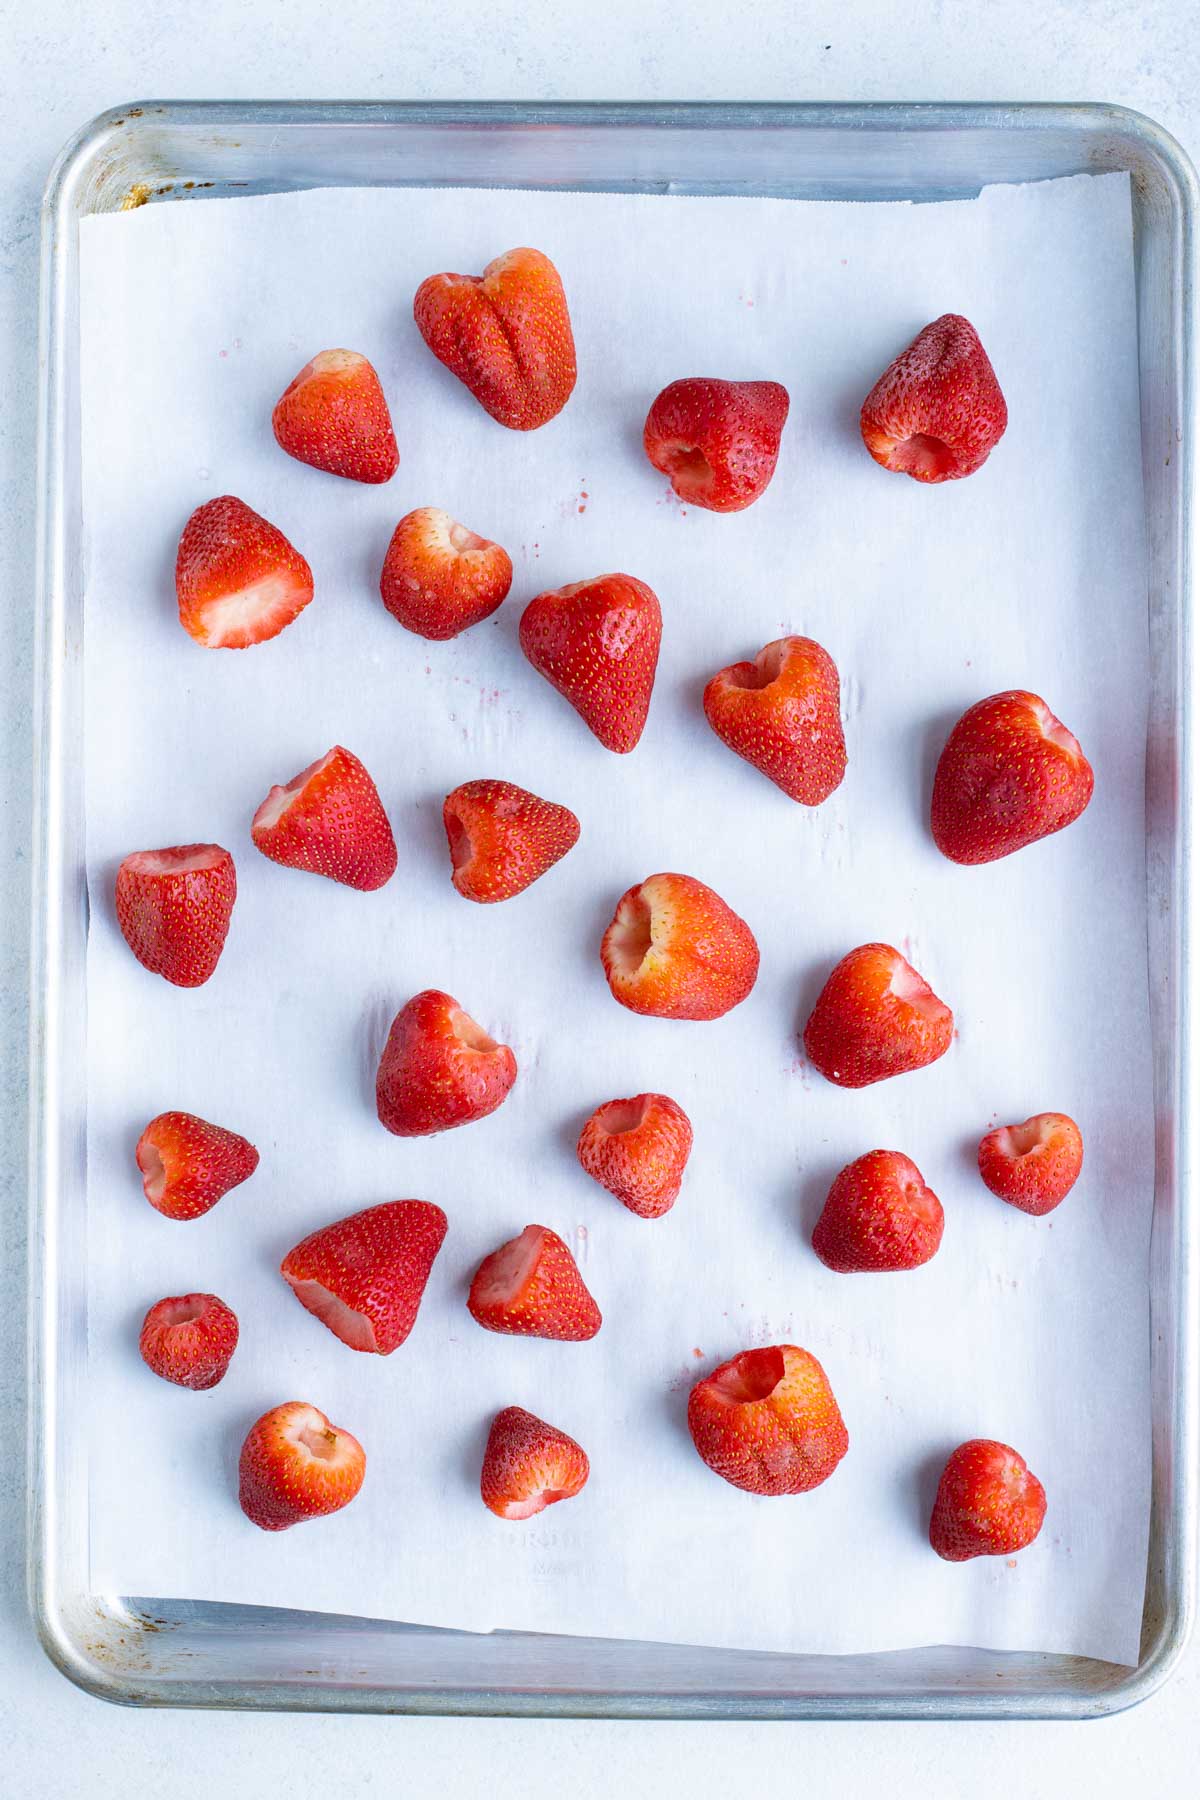 Prepared strawberries are laid flat to put in the freezer.